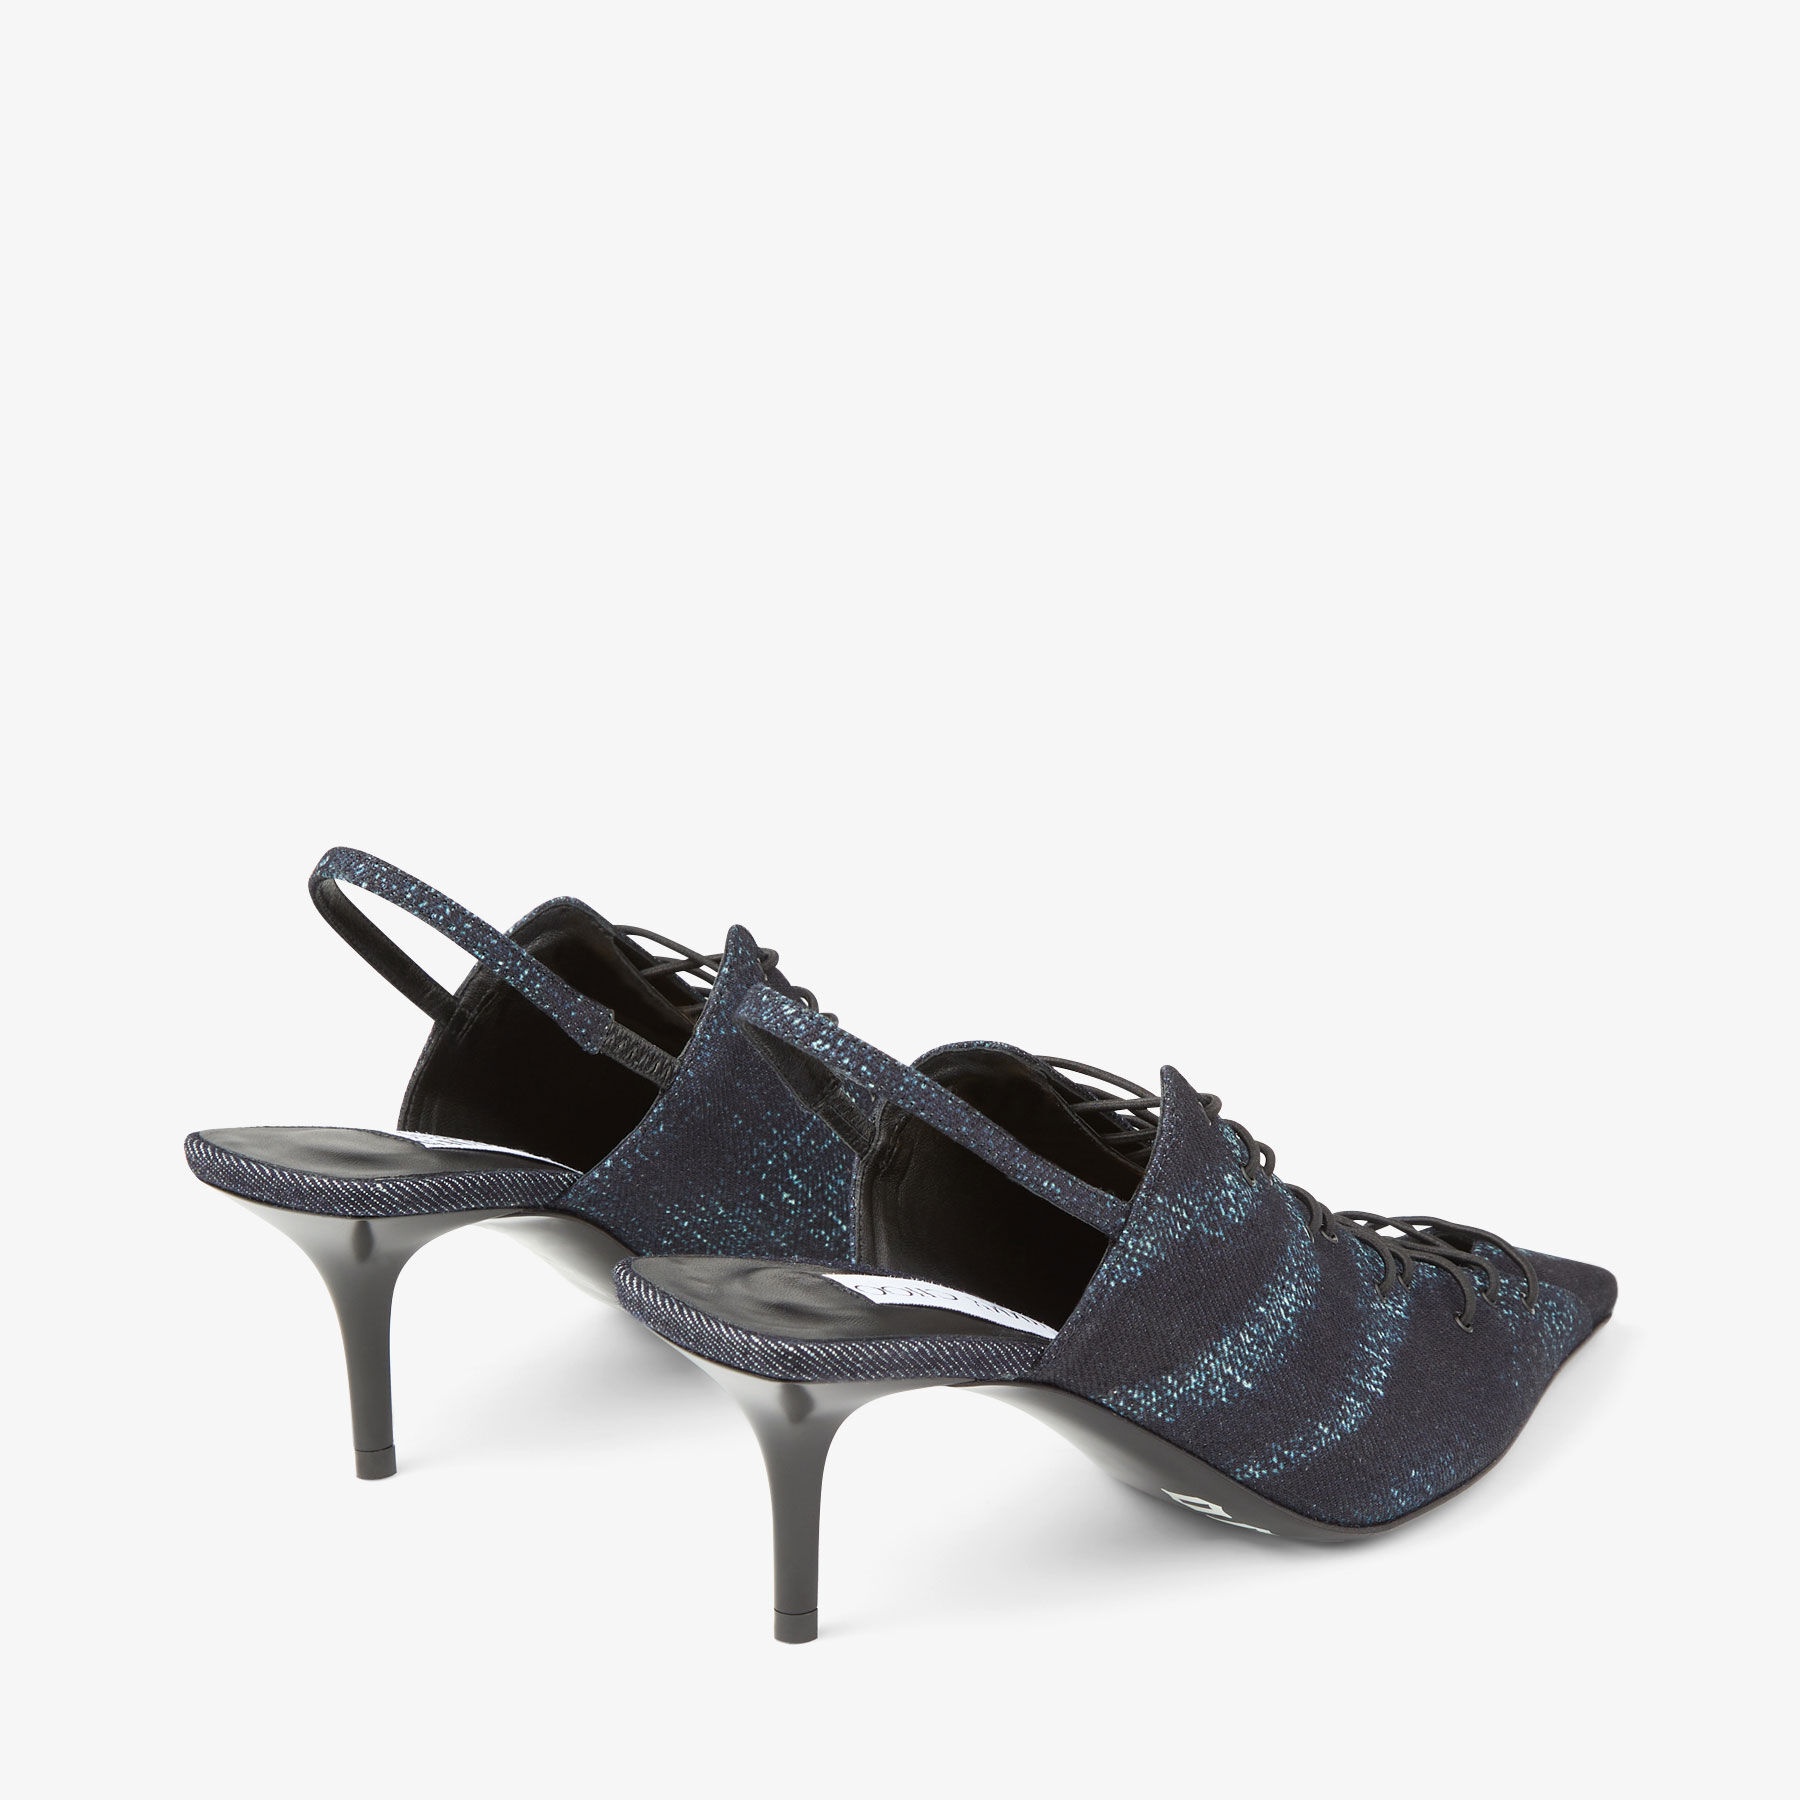 Jimmy Choo / Jean Paul Gaultier Sling Back 60
Denim Print Fabric Sling Back Pumps with Laces - 7